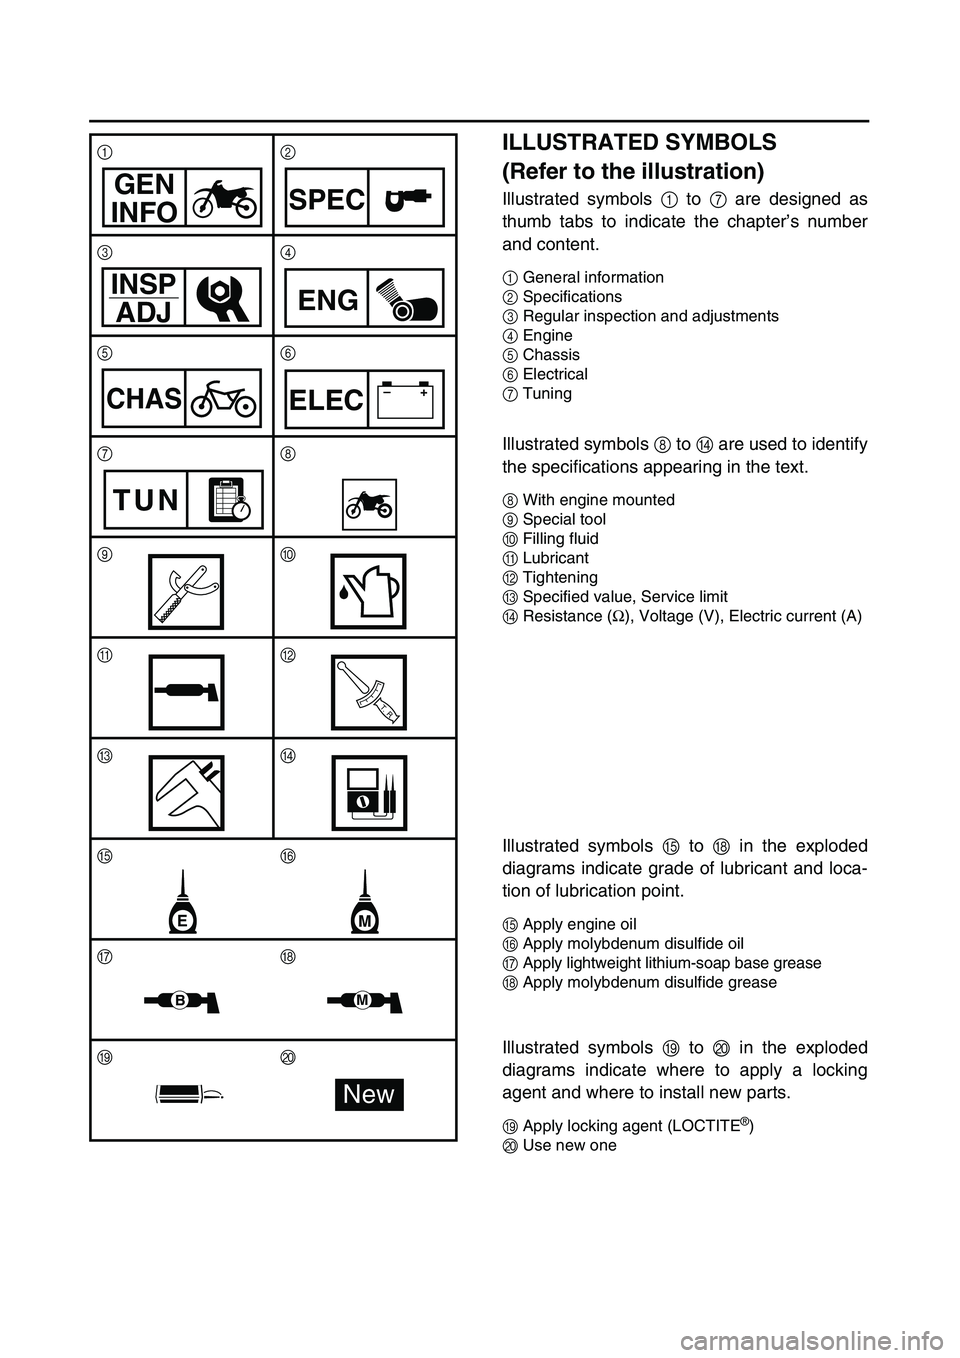 YAMAHA WR 450F 2003  Betriebsanleitungen (in German)  
ILLUSTRATED SYMBOLS 
(Refer to the illustration) 
Illustrated symbols   
1  
 to   
7  
 are designed as
thumb tabs to indicate the chapter’s number
and content. 
1  
General information  
2  
Spe